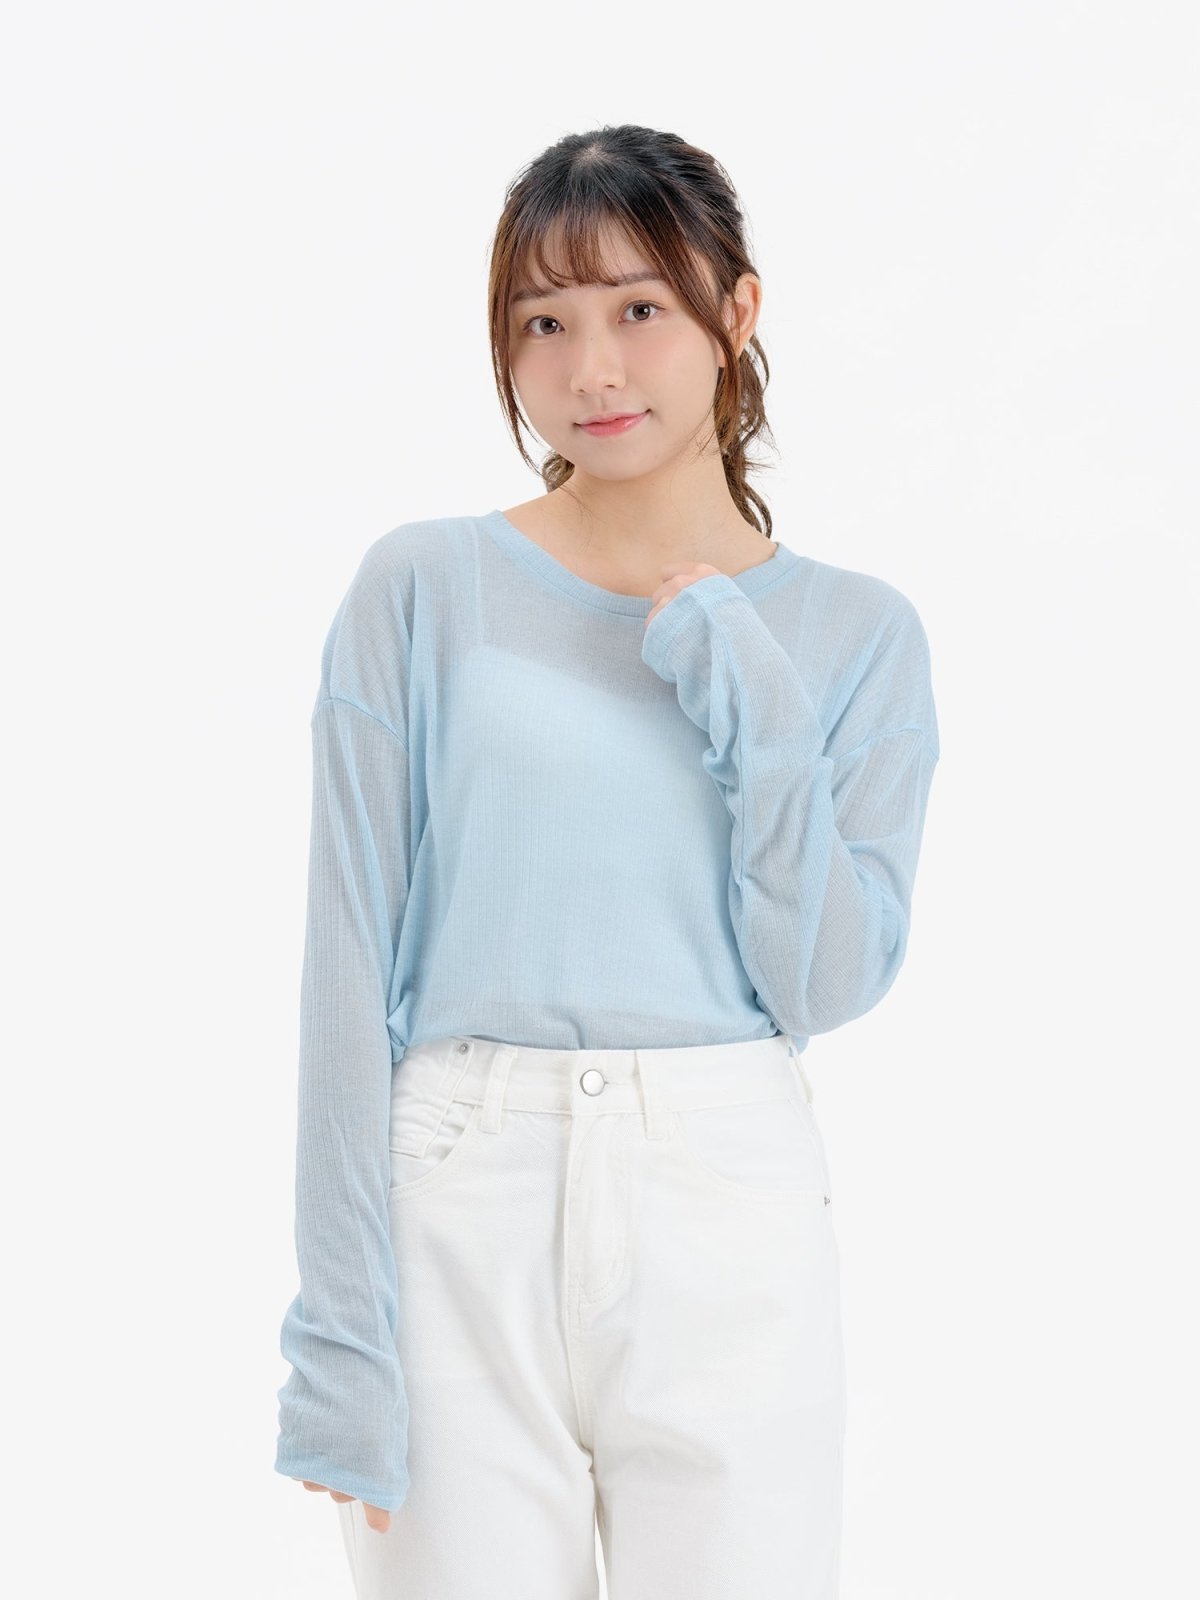 See-through Knit Top - DAG-8-9644-22BlueF - Baby Blue - F - D'zage Designs